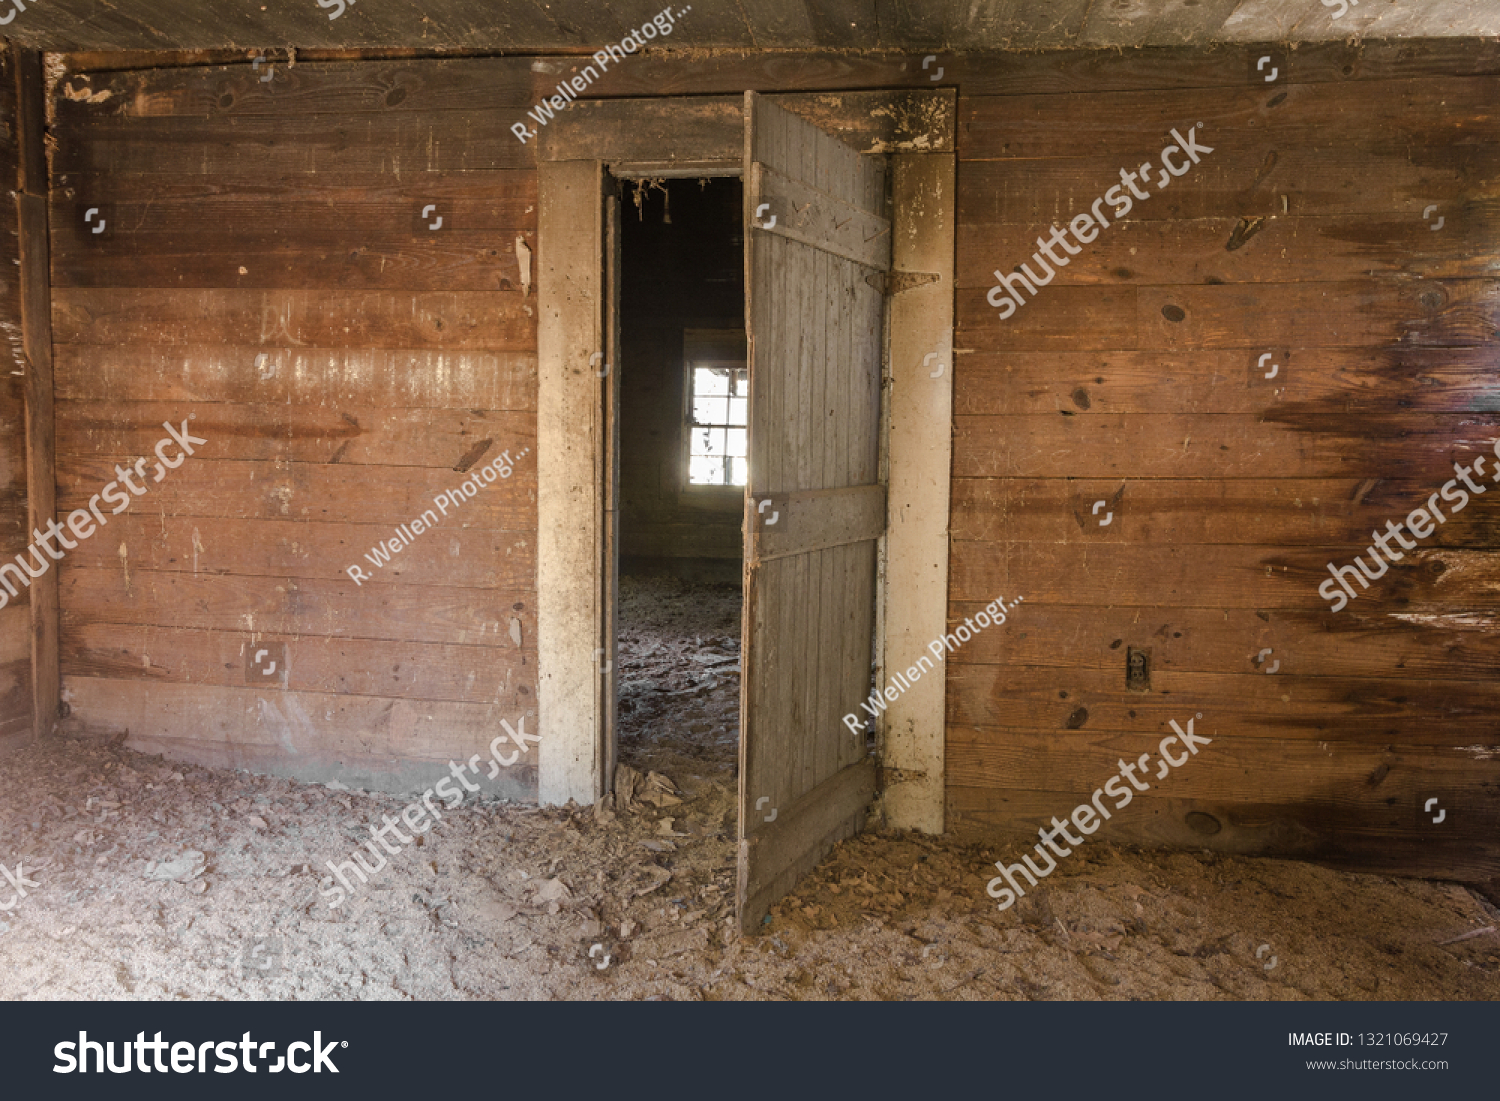 Abandoned farmhouse with wood paneled wall and open grey door deep rural in the south #1321069427